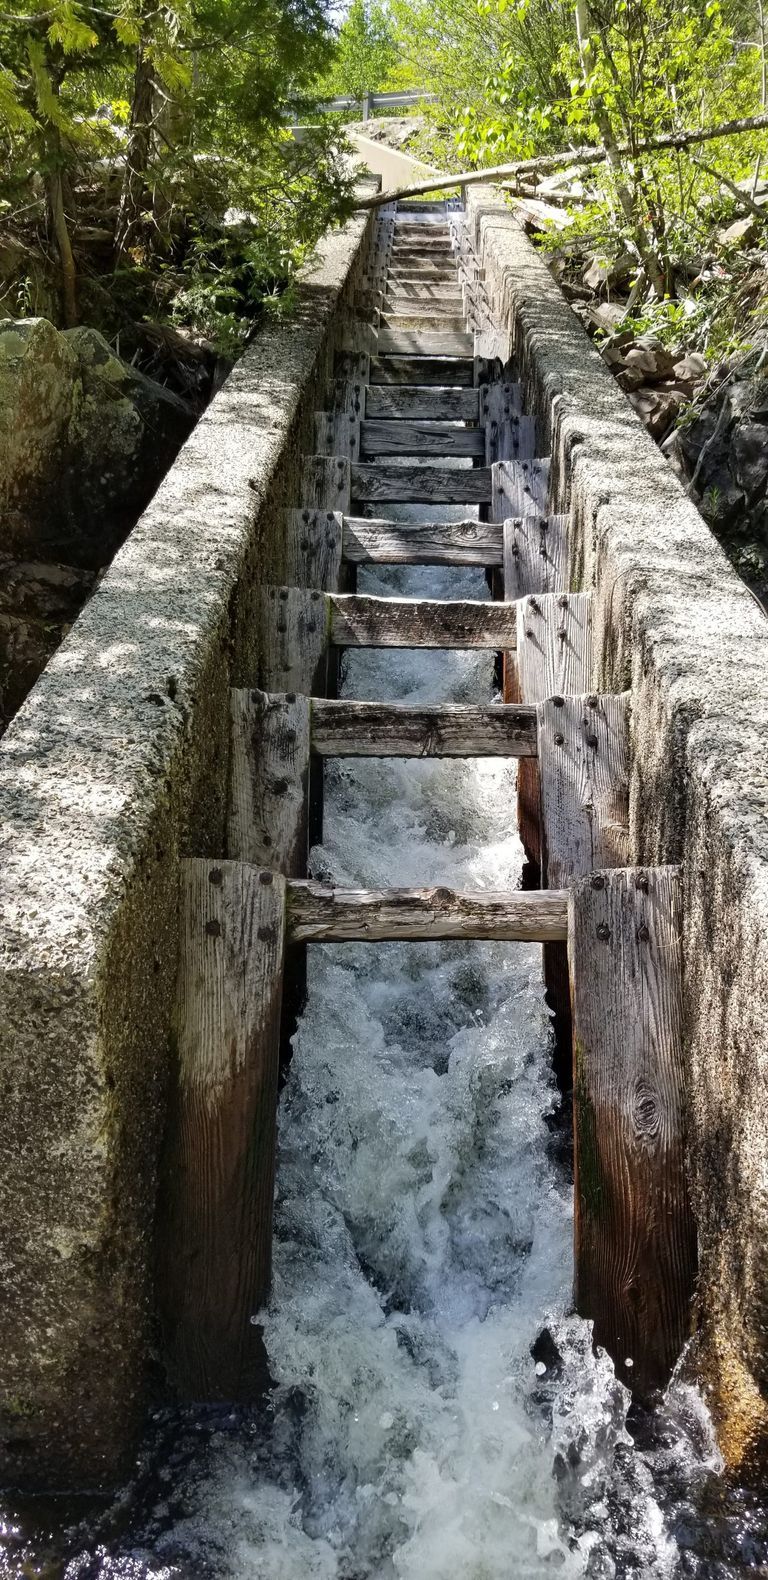          Fish ladder on the Cathance Stream below Route 86
   